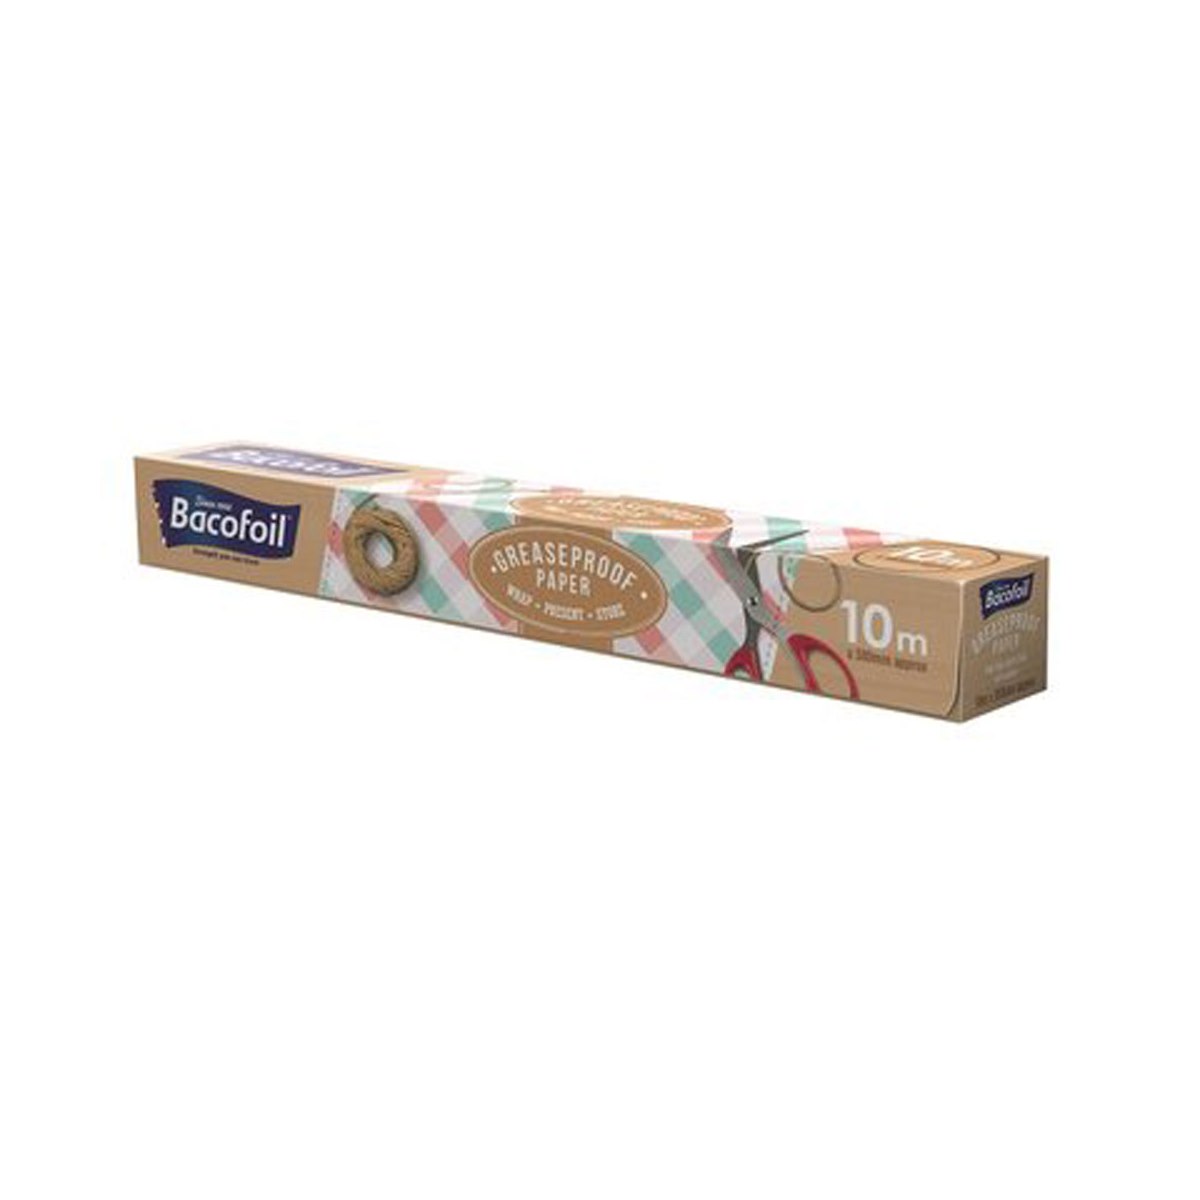 Bacofoil Greaseproof Paper